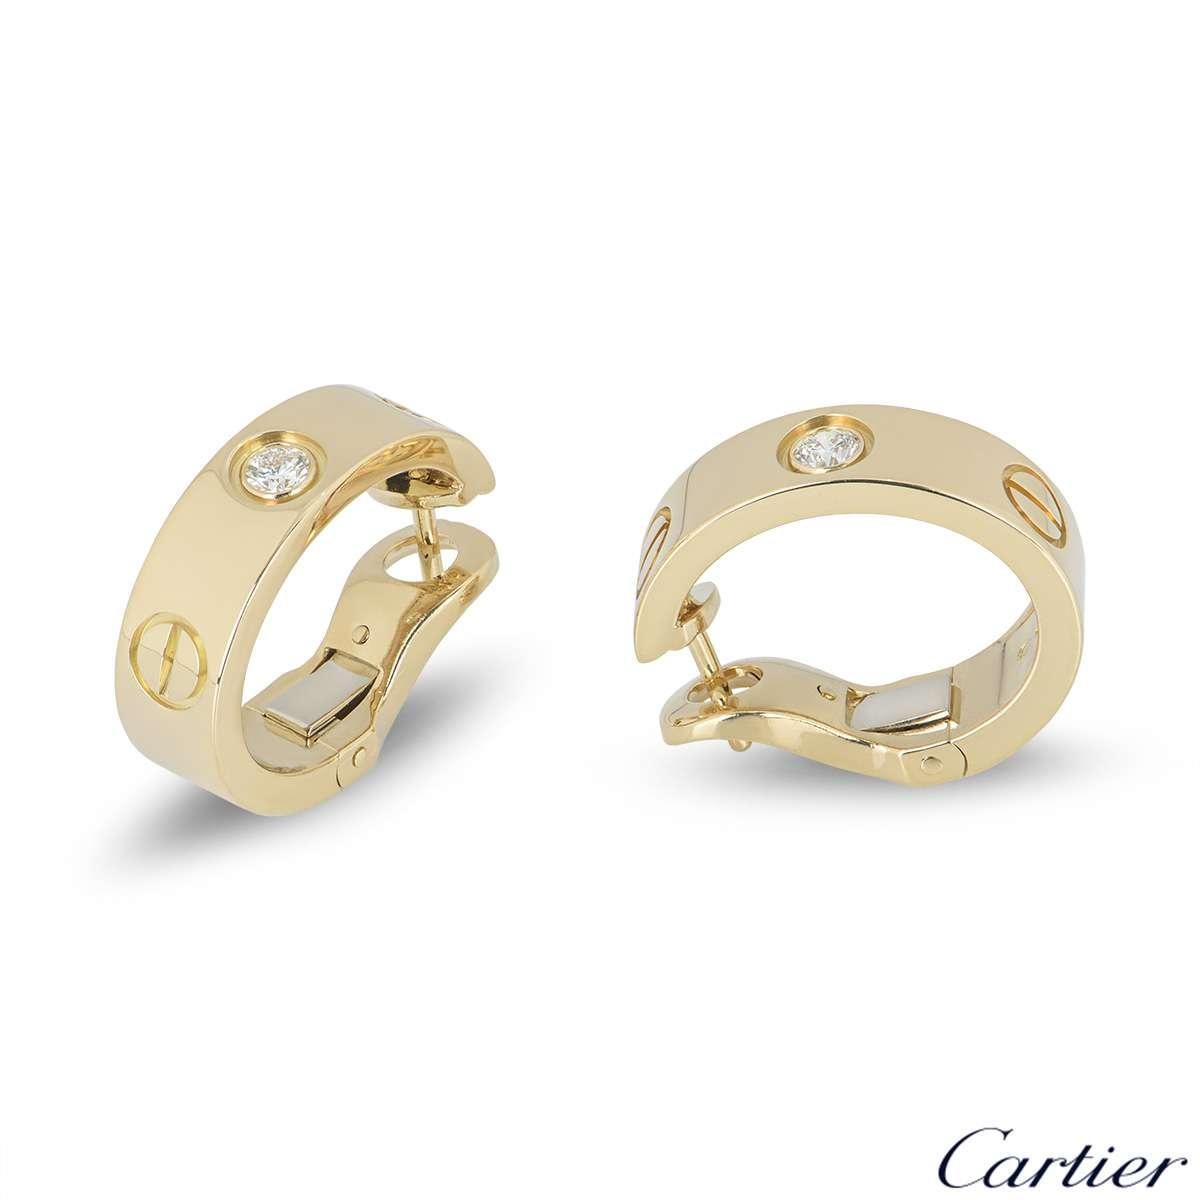 A pair of 18k yellow gold diamond earrings from the iconic Love collection by Cartier. Each hoop earring is set with a single round brilliant cut diamonds. The earrings are 18mm in length and 5mm in width and feature a post and lever hinged